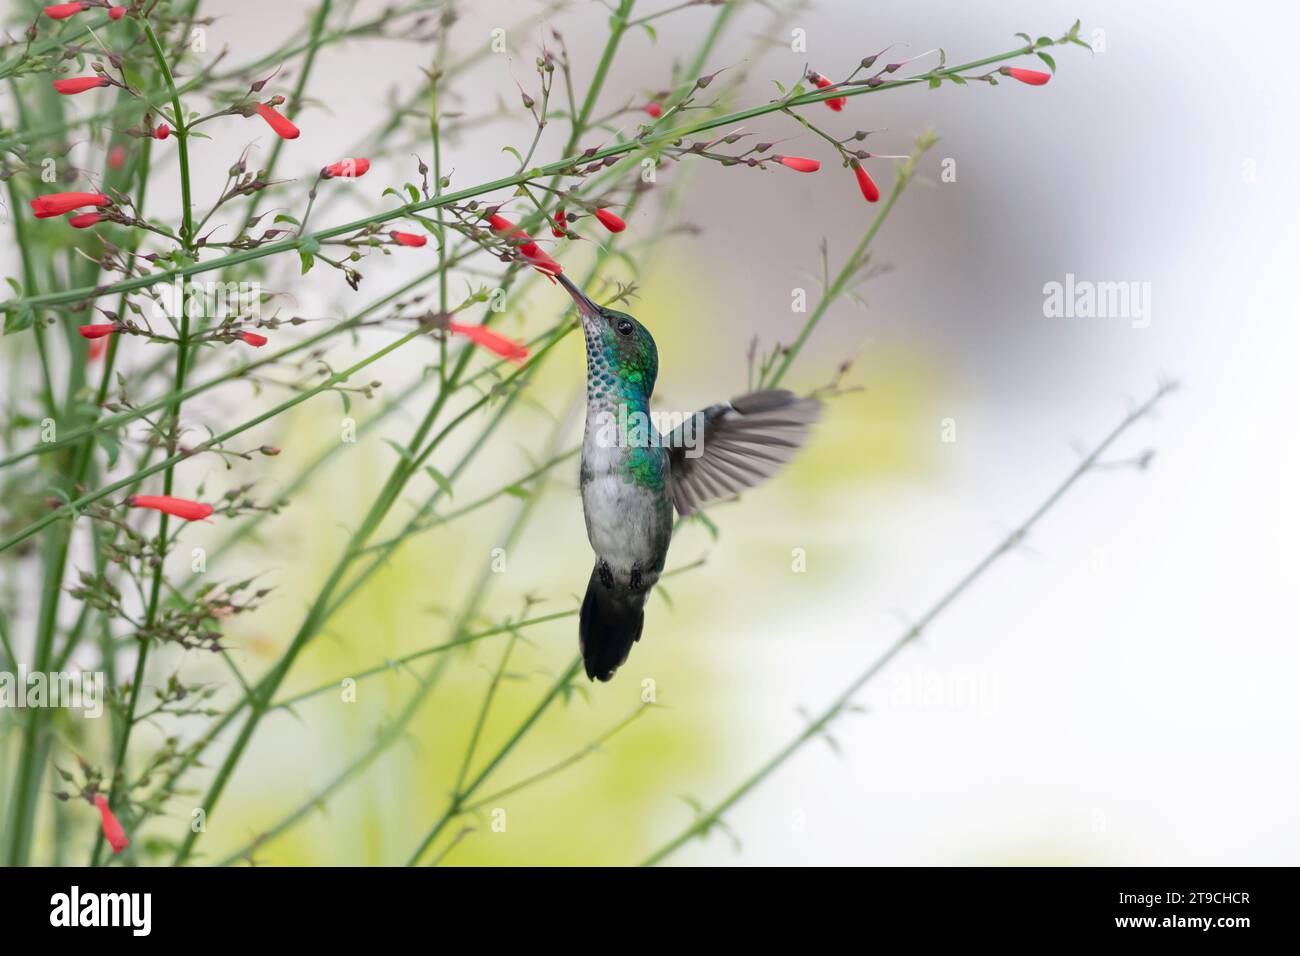 A Blue-chinned Sapphire hummingbird, Chlorestes Notata, pollinating red flowers hovering in the air with pastel colors in background Stock Photo